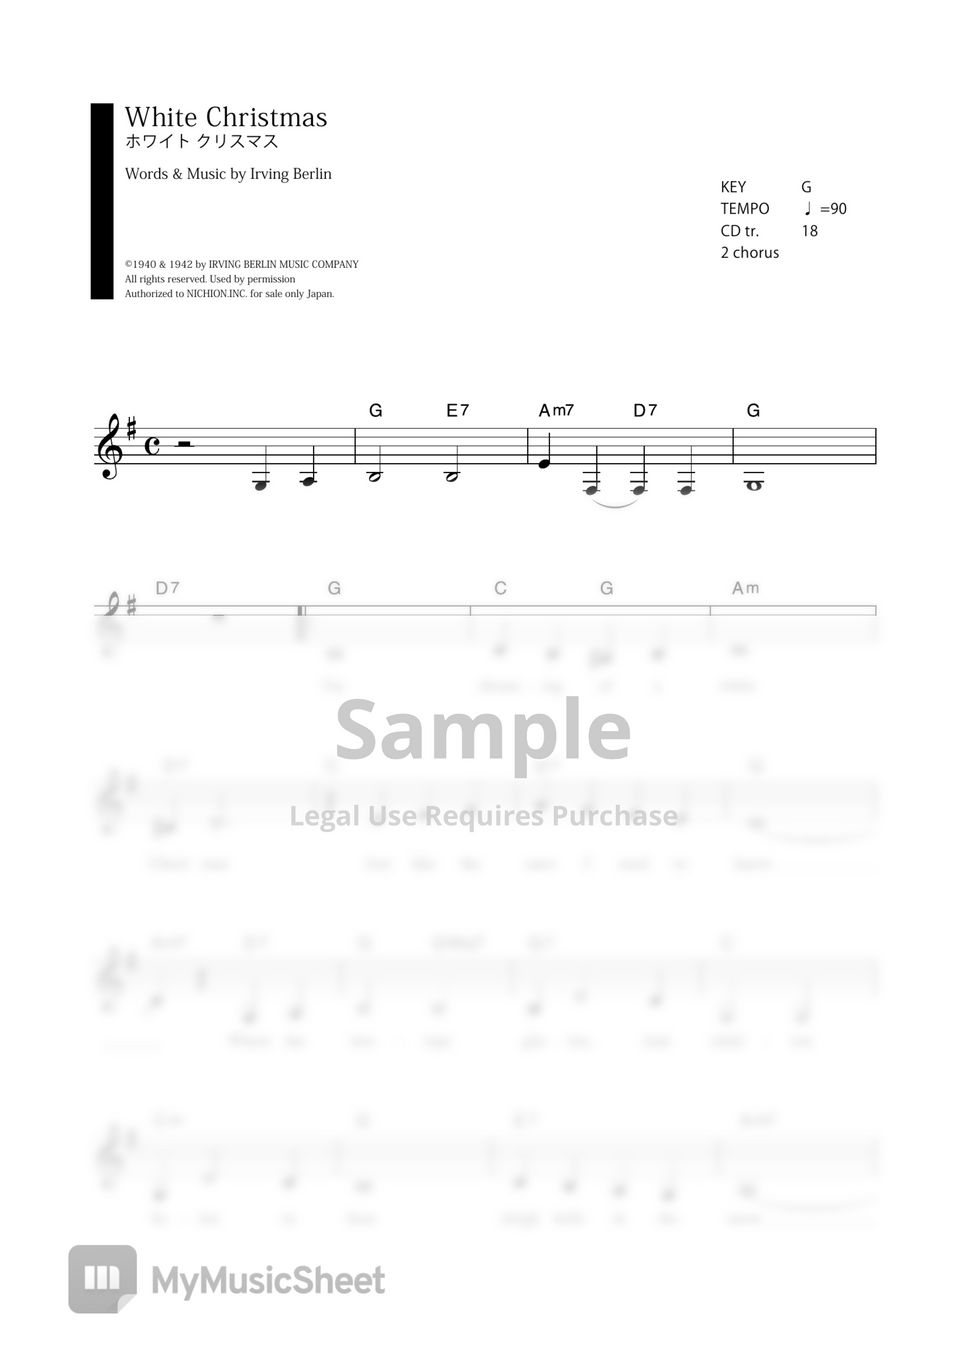 WHITE CHRISTMAS (VOCAL MAGAZINE) Sheets by Far East Island Record